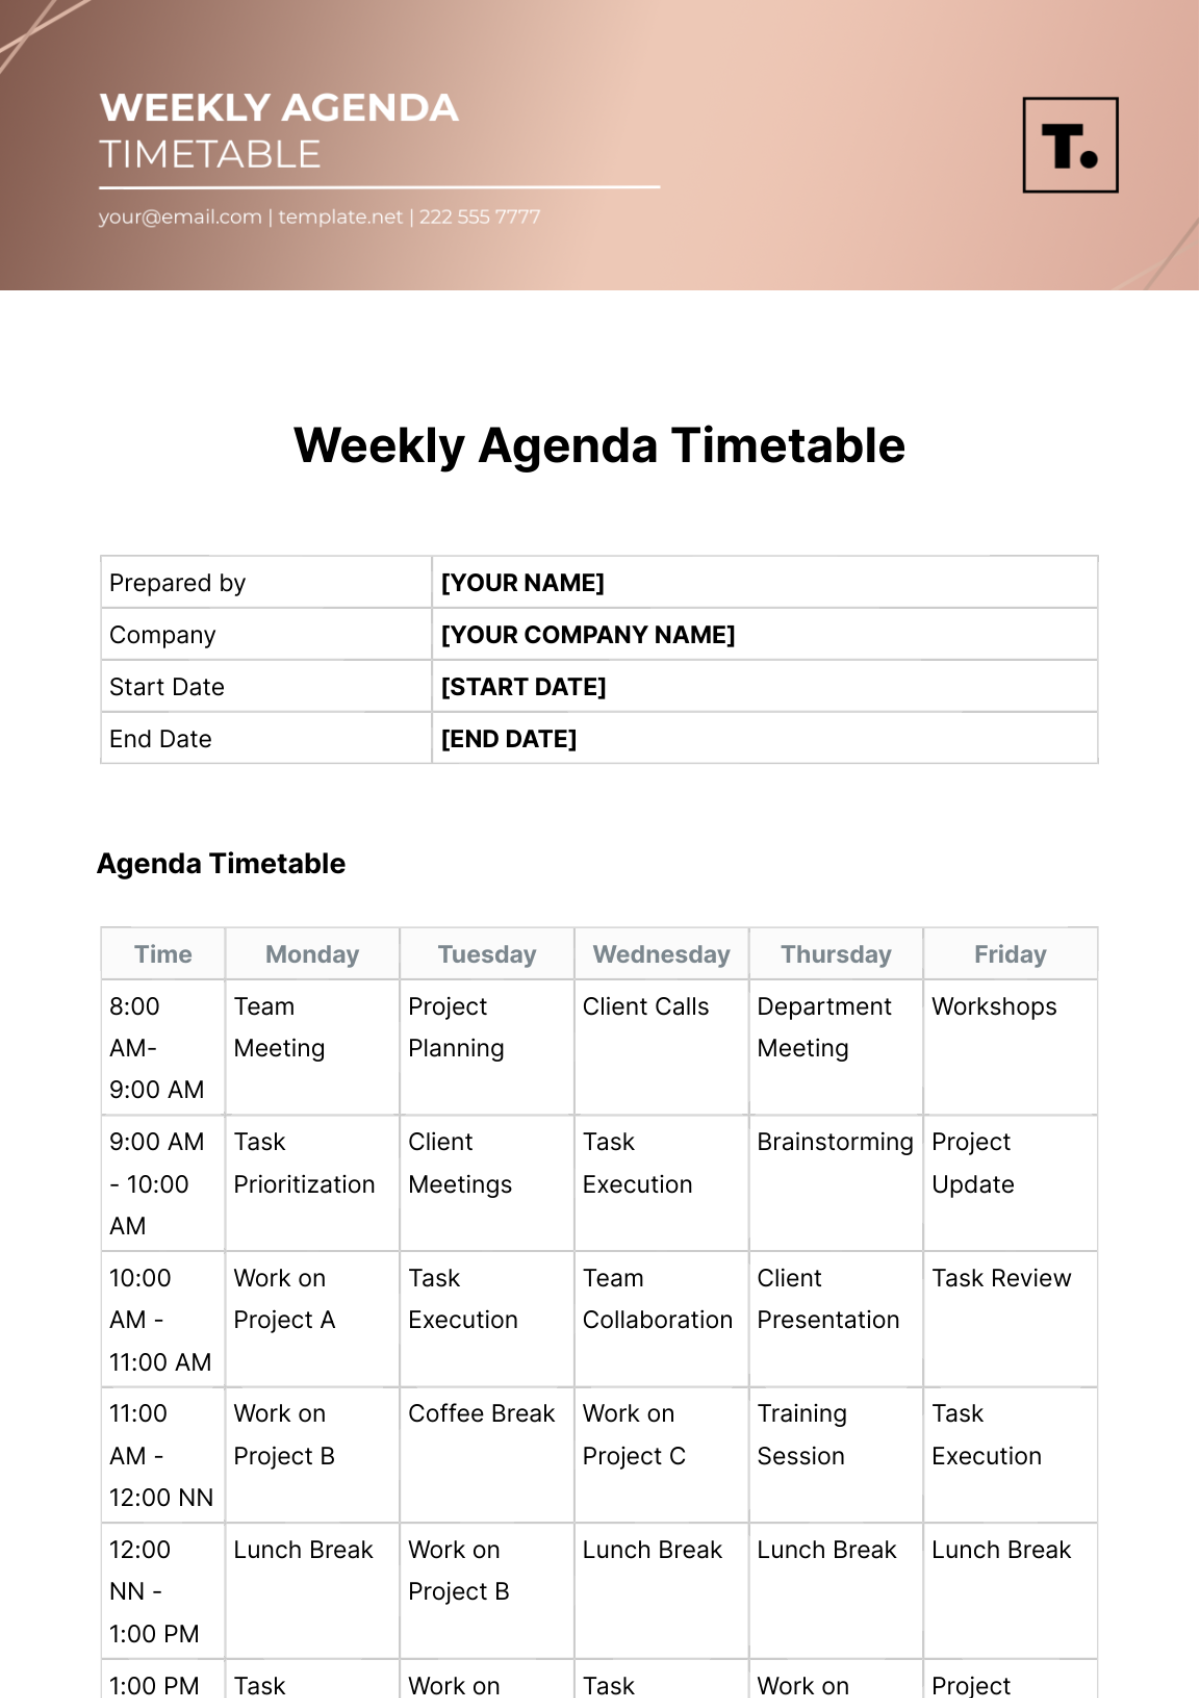 Weekly Agenda Timetable Template